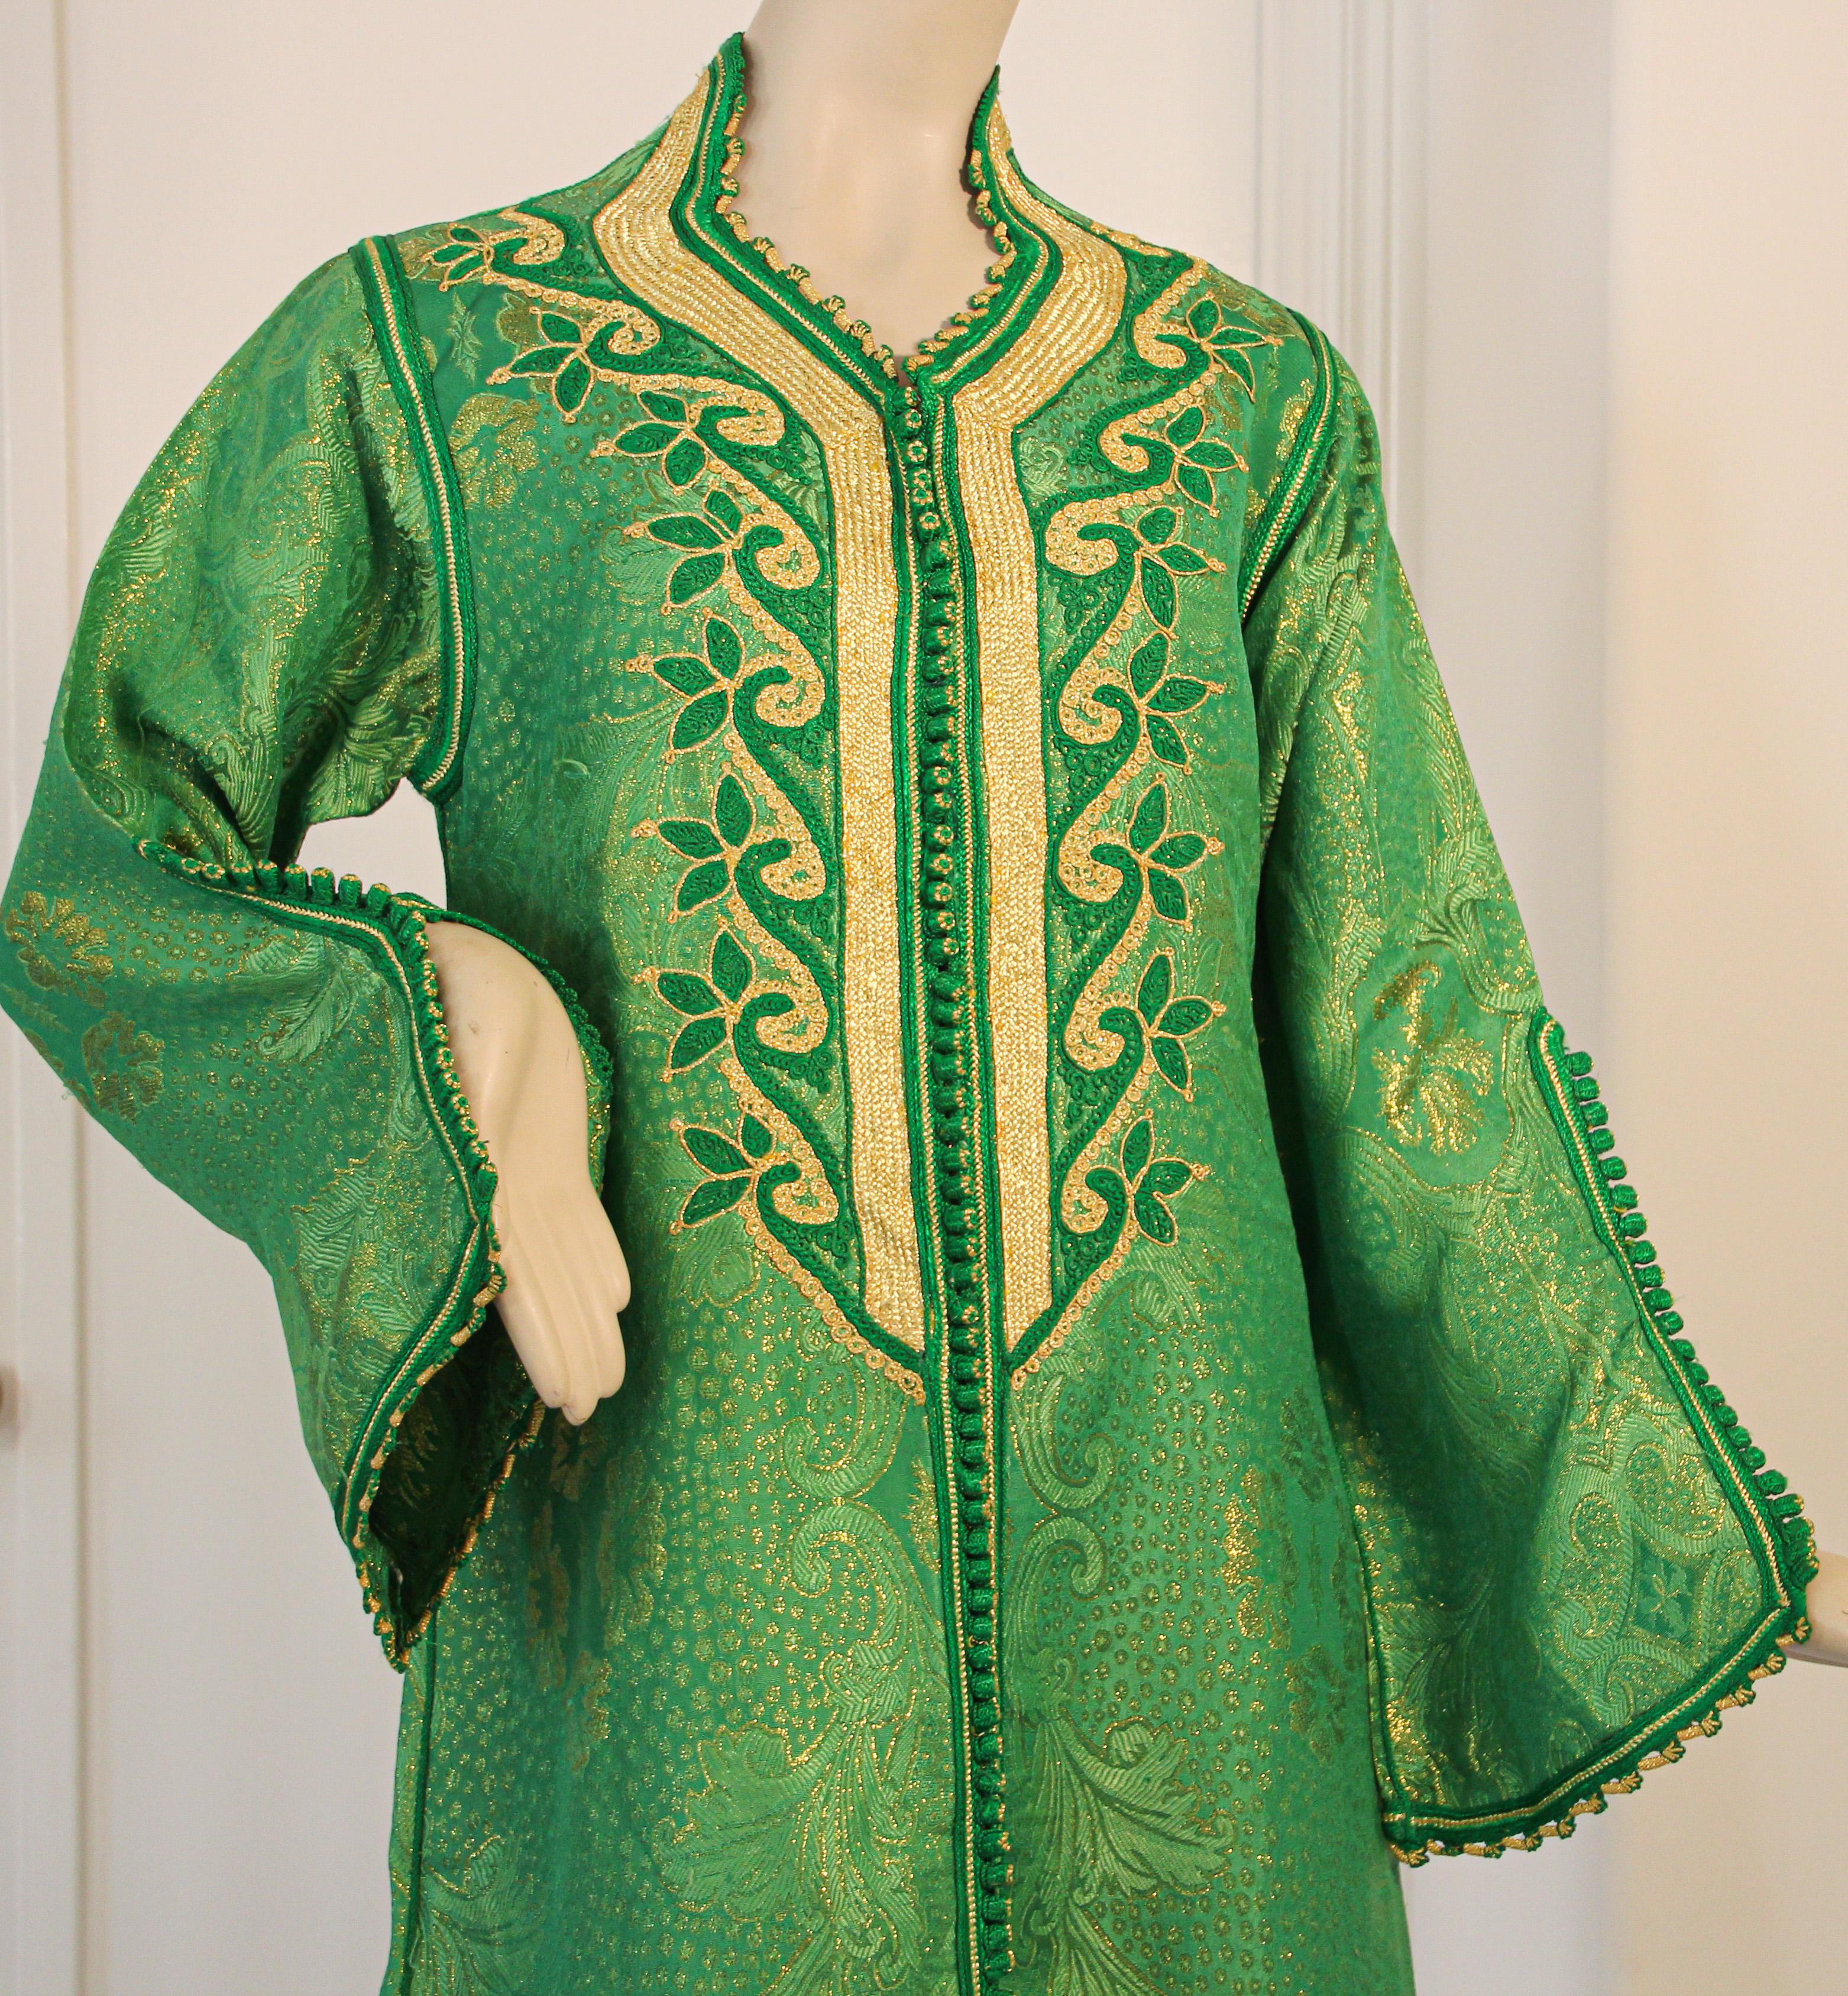 Embroidered Elegant Moroccan Caftan Emerald Green and Gold Metallic Brocade For Sale